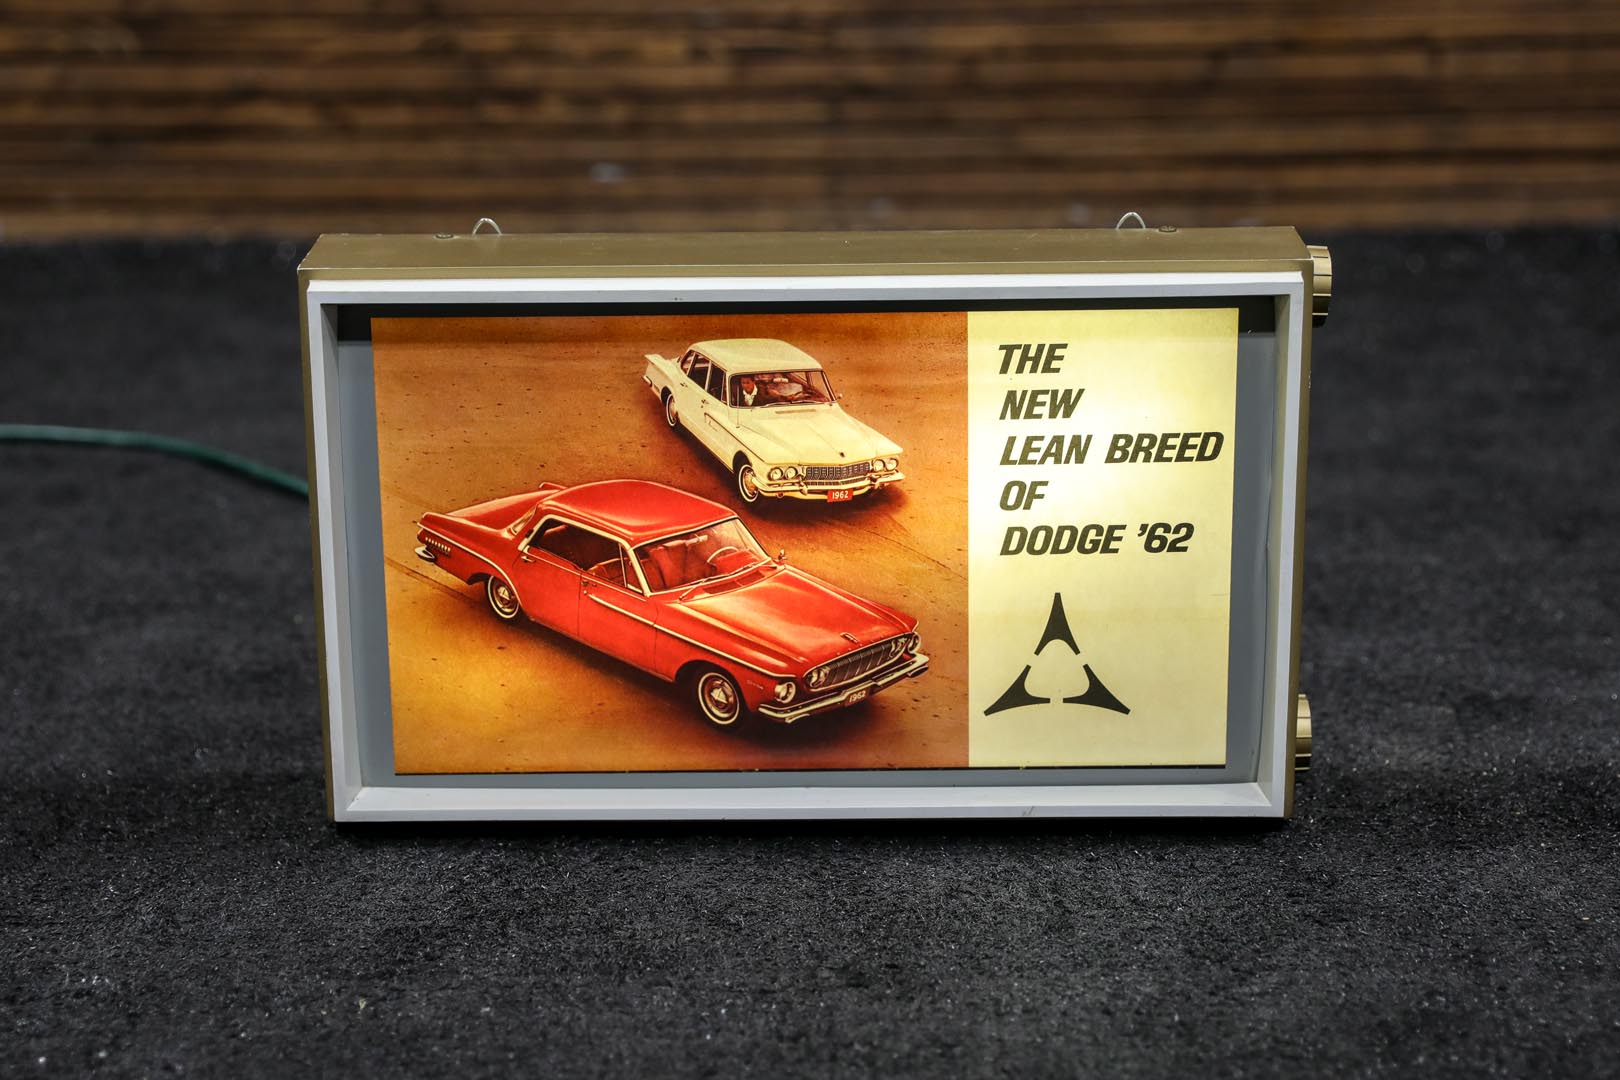  New Lean Breed-Dodge 1962 Ligh ted Display 